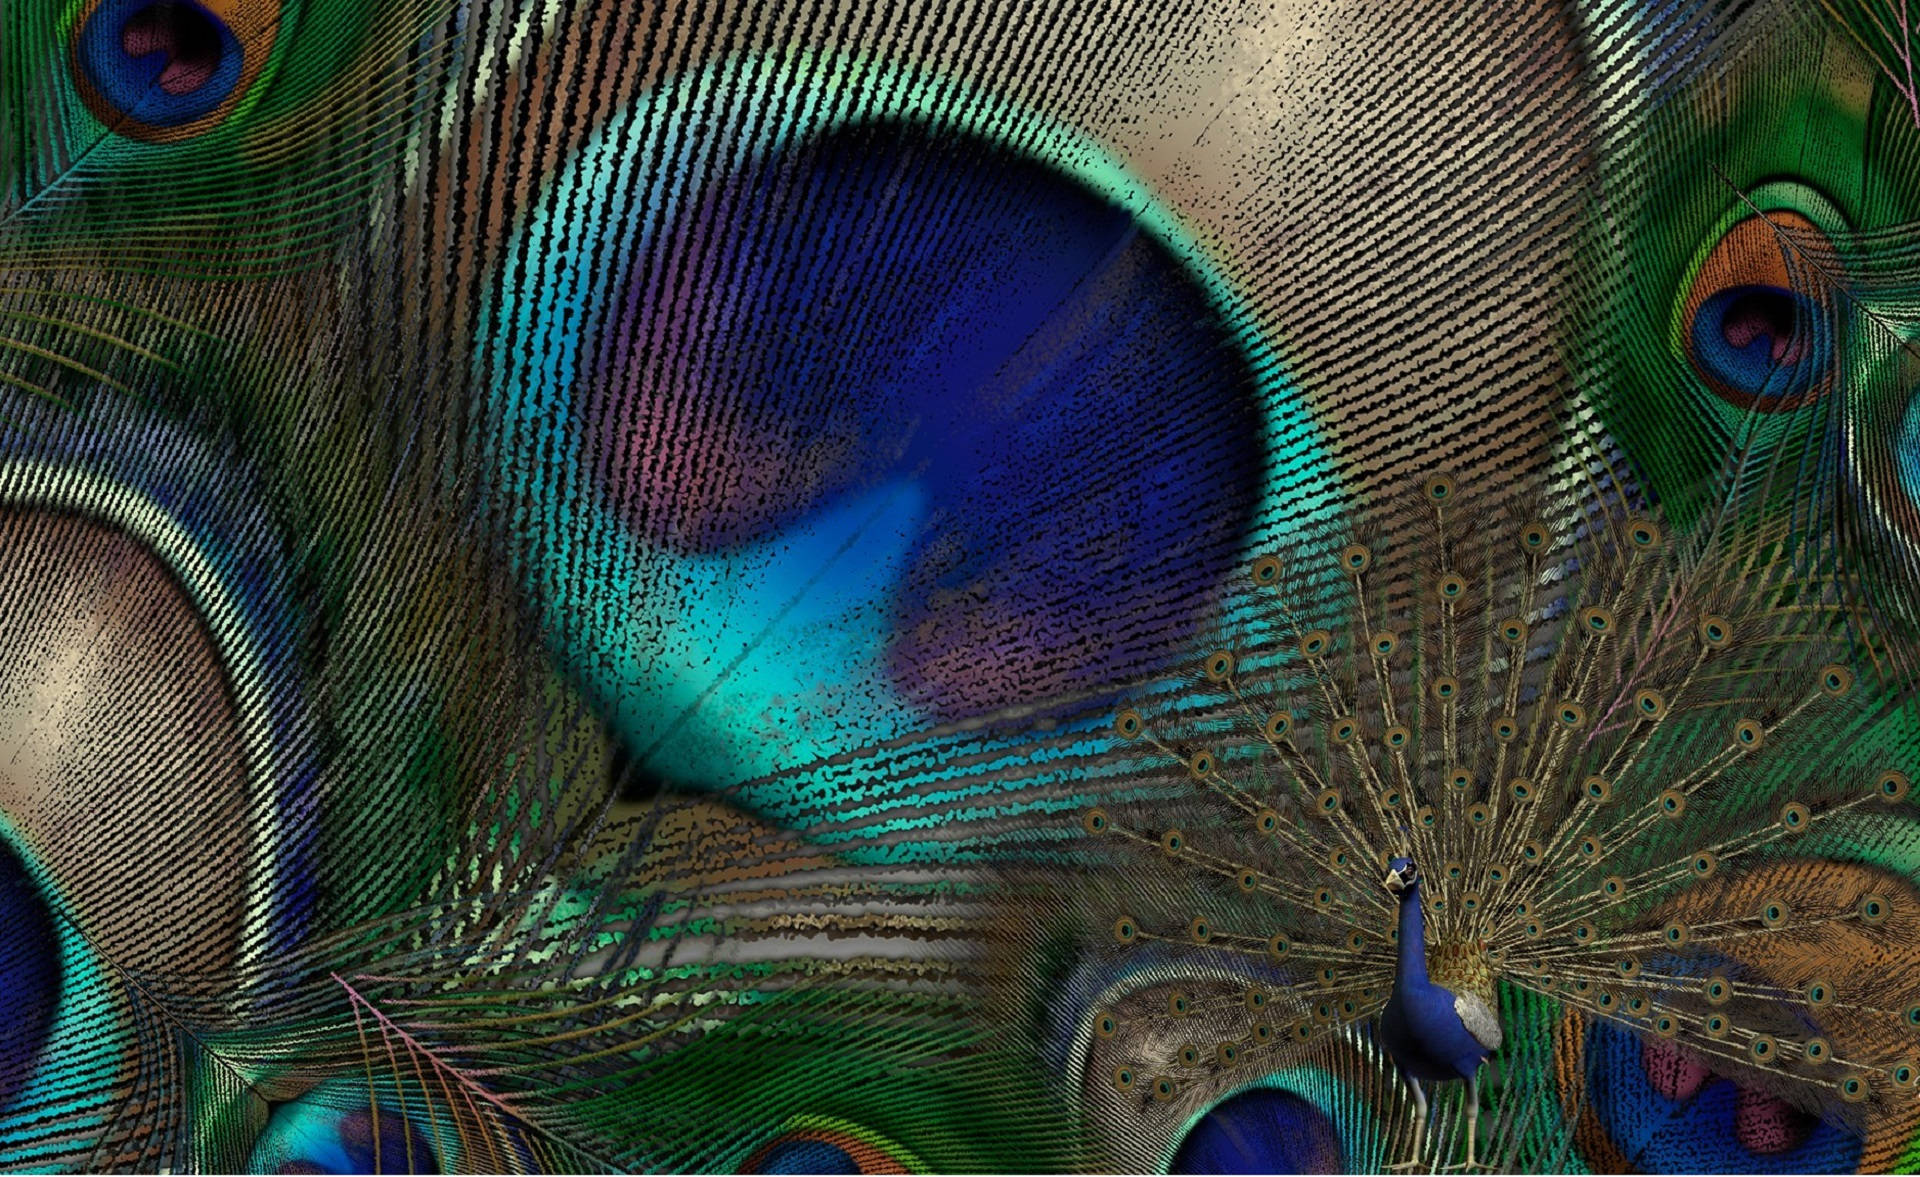 Caption: Graceful Artistry of the Whimsical Peacock Feather Wallpaper